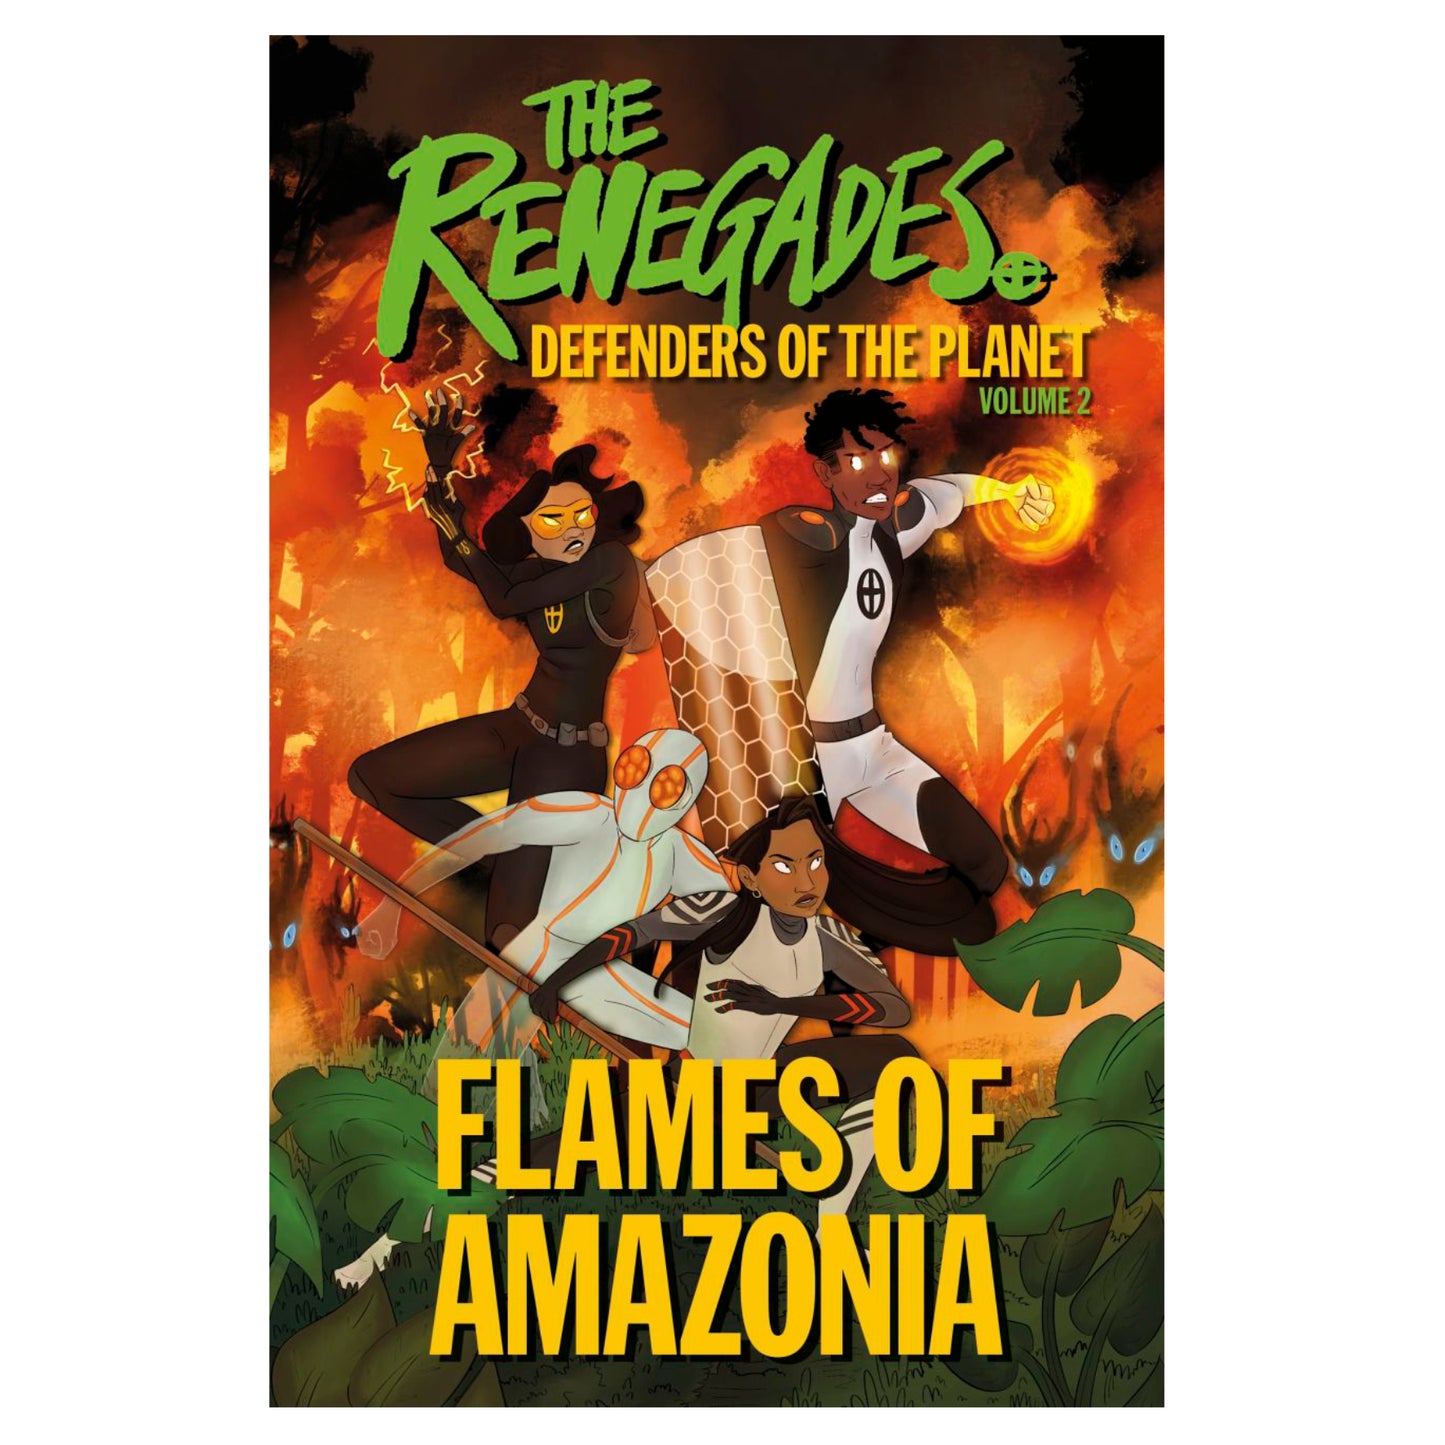 Book -  The Renegades Flames of Amazonia